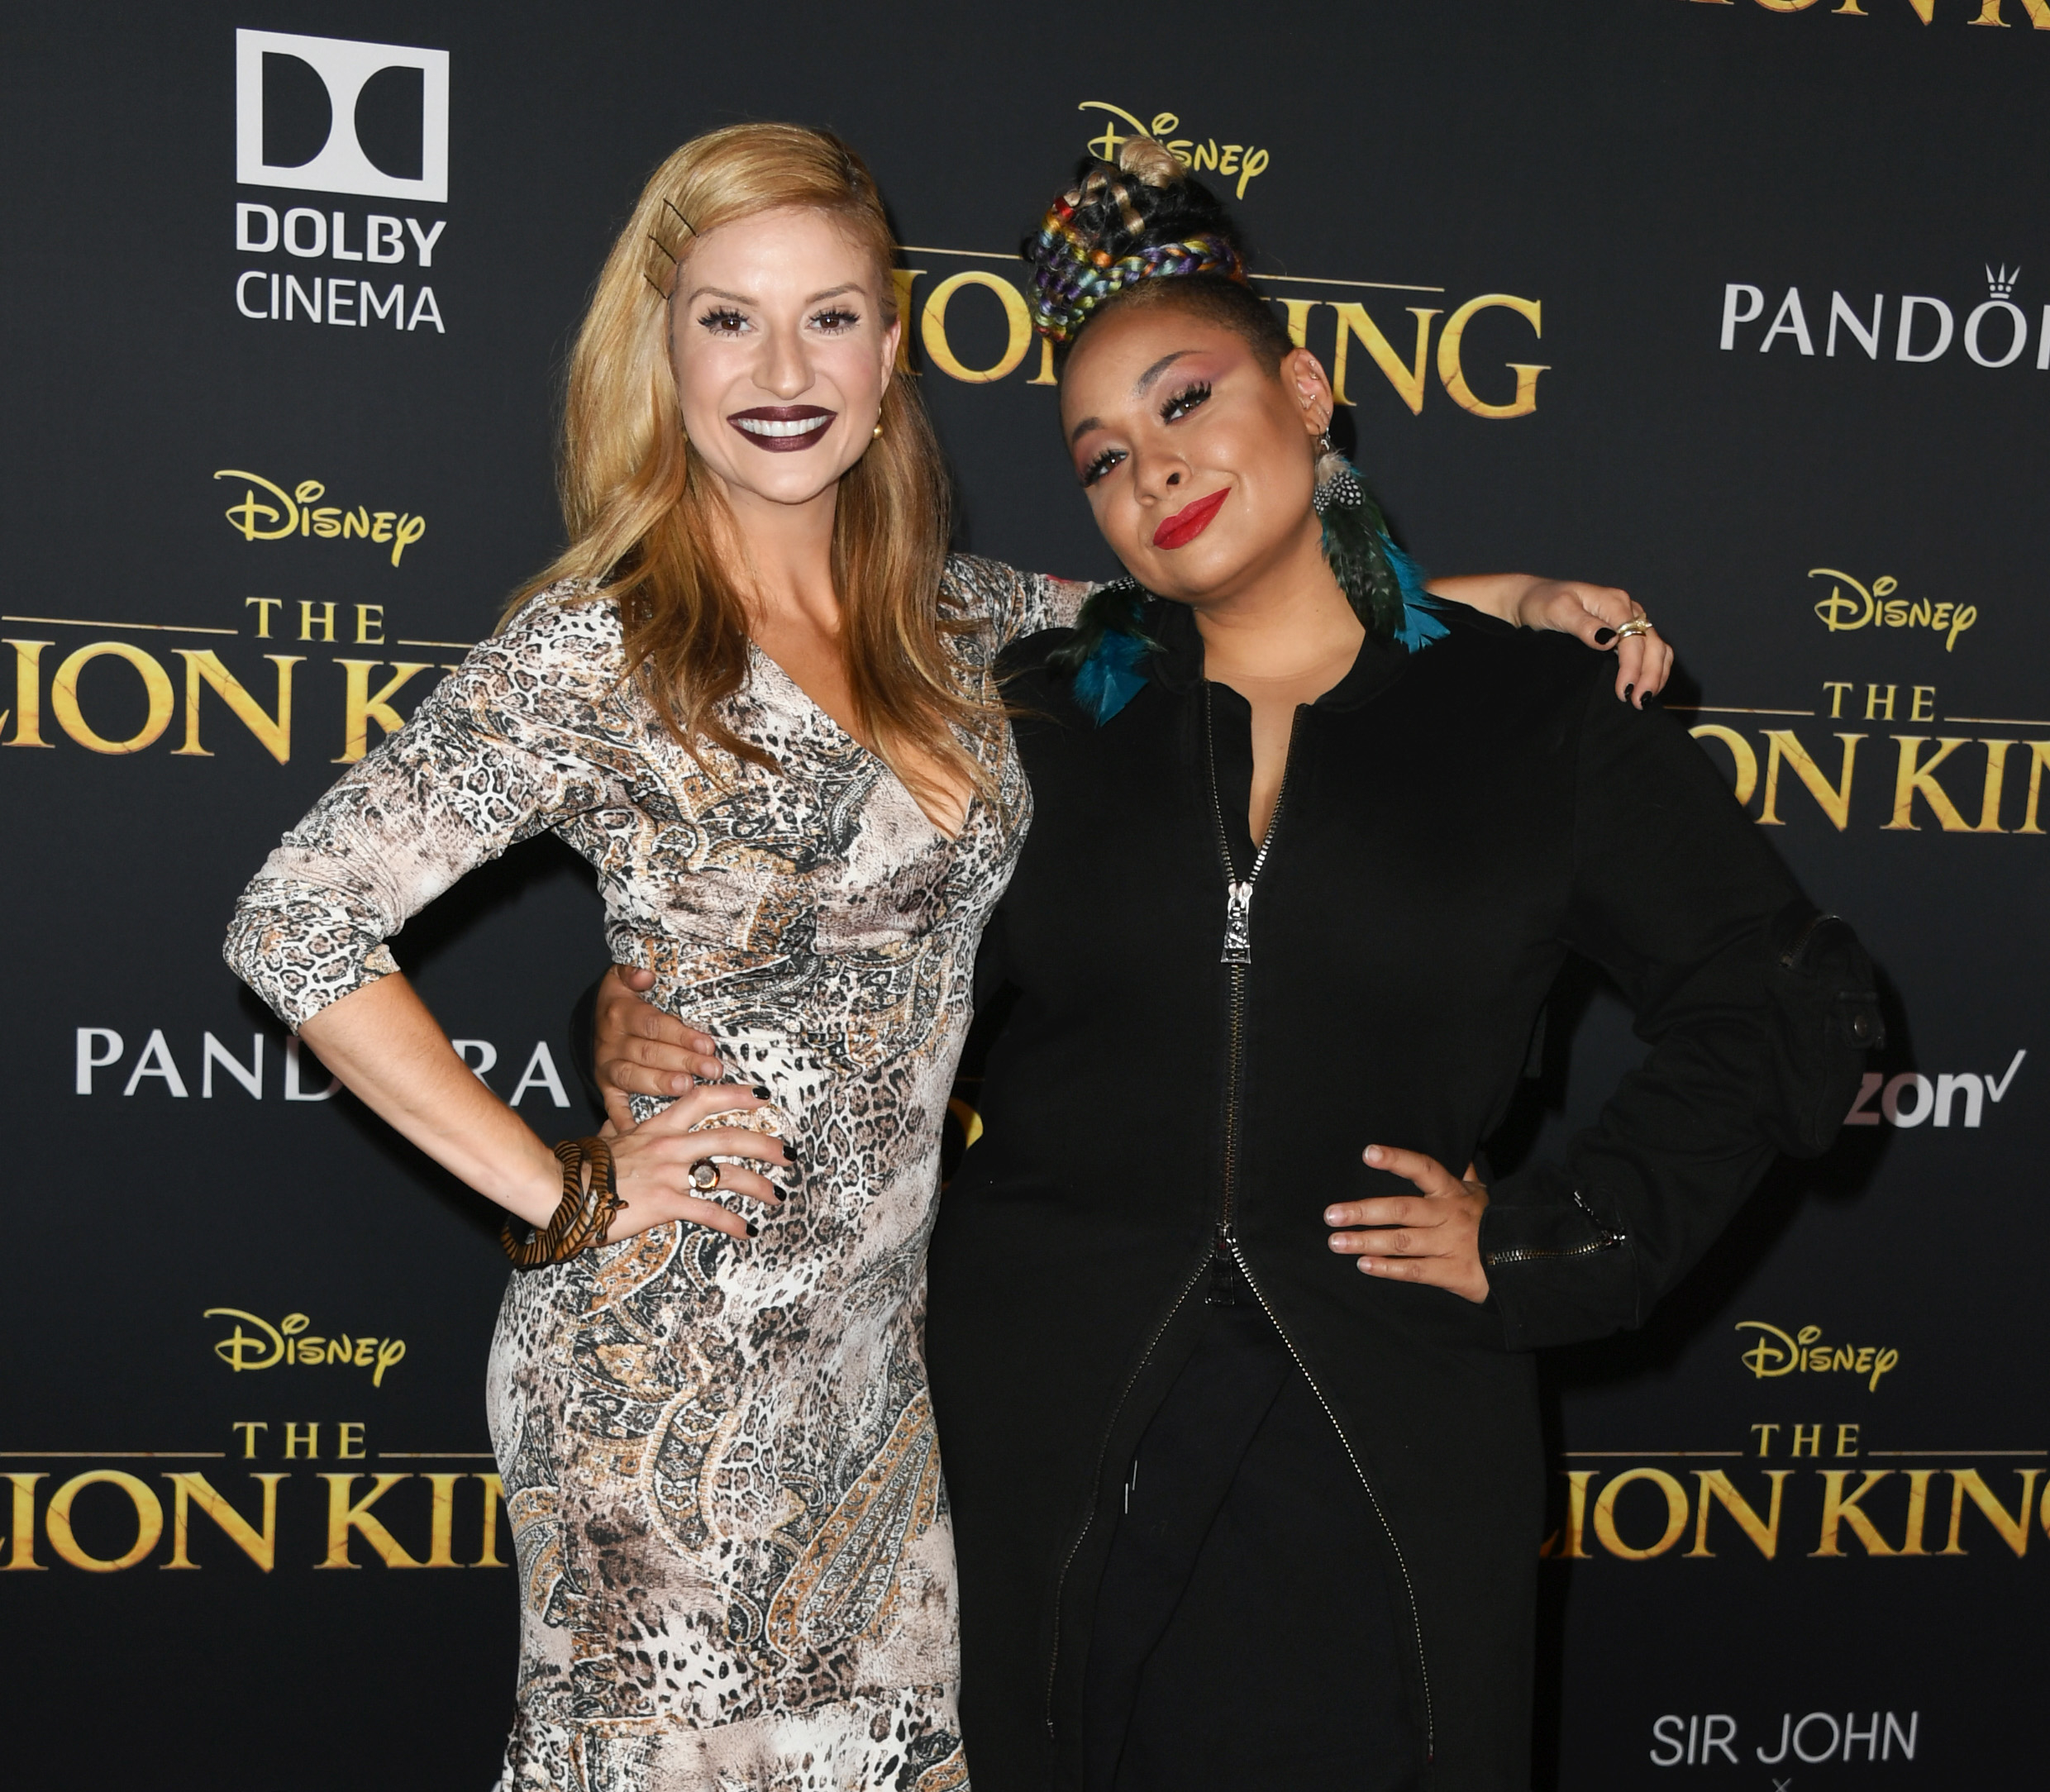 Anneliese and Raven smiling and hugging at a media event